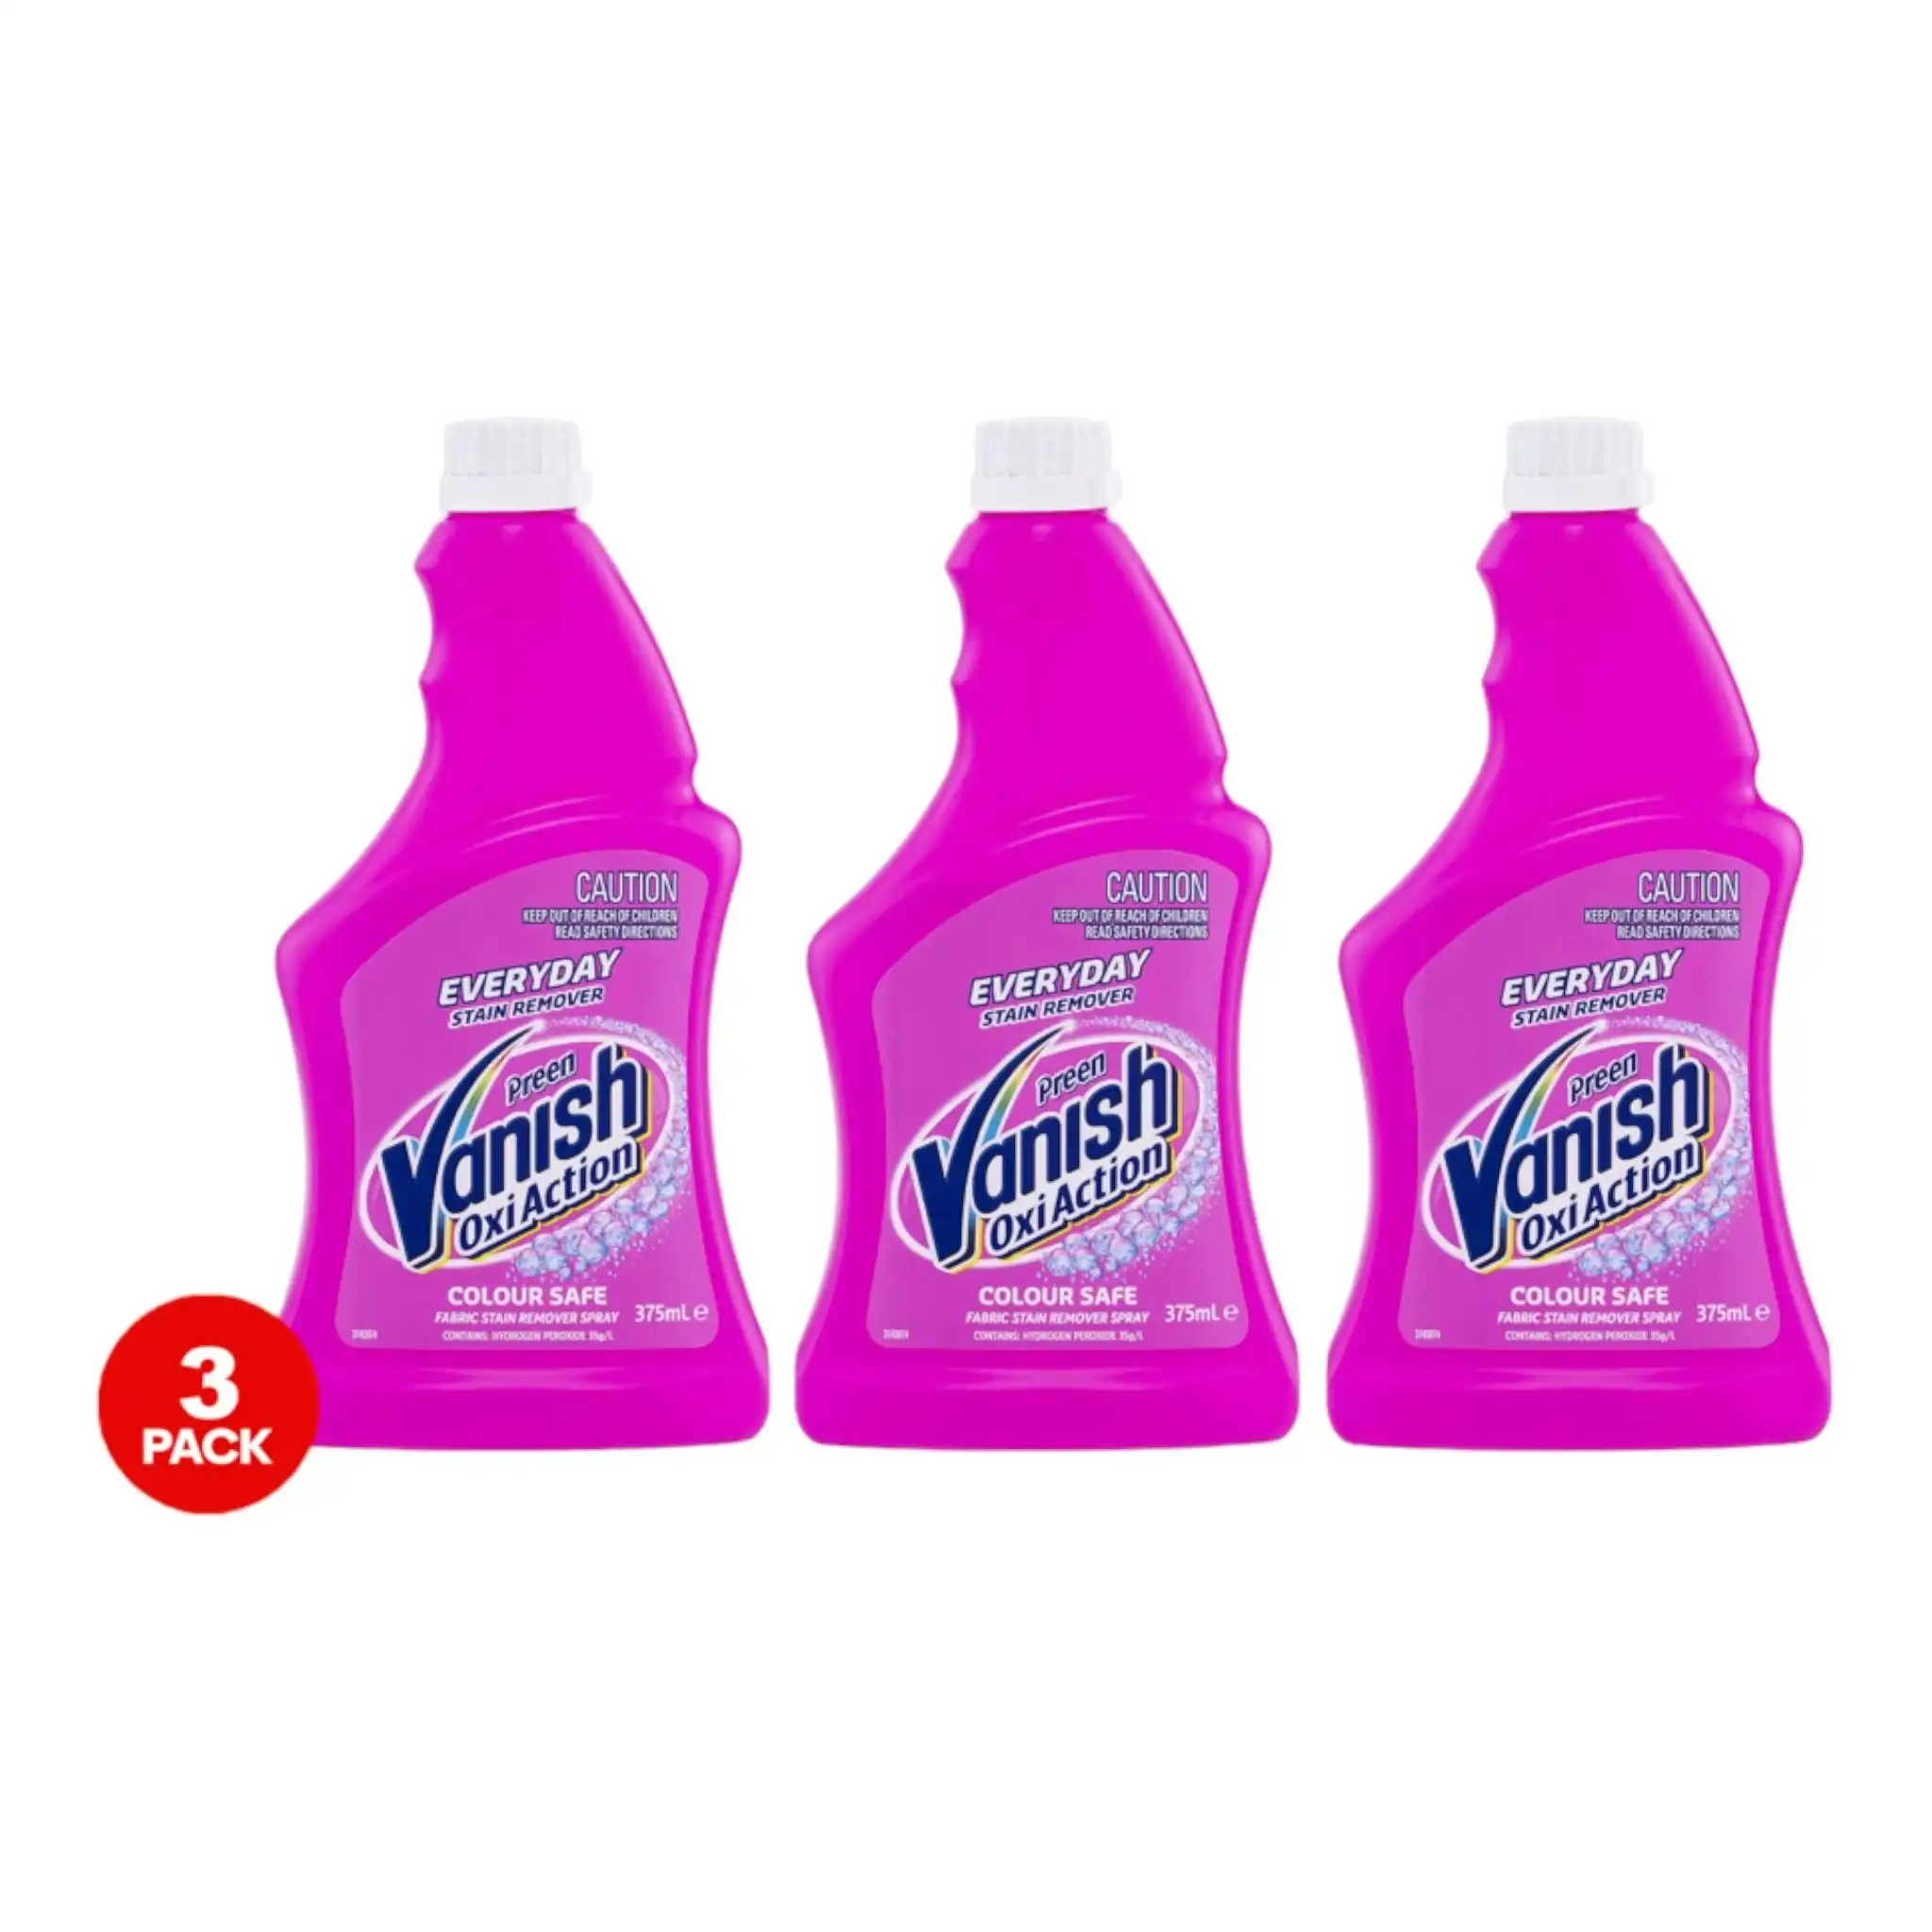 3 Pack Vanish Preen OxiAction Everyday Stain Remover Refill 375mL